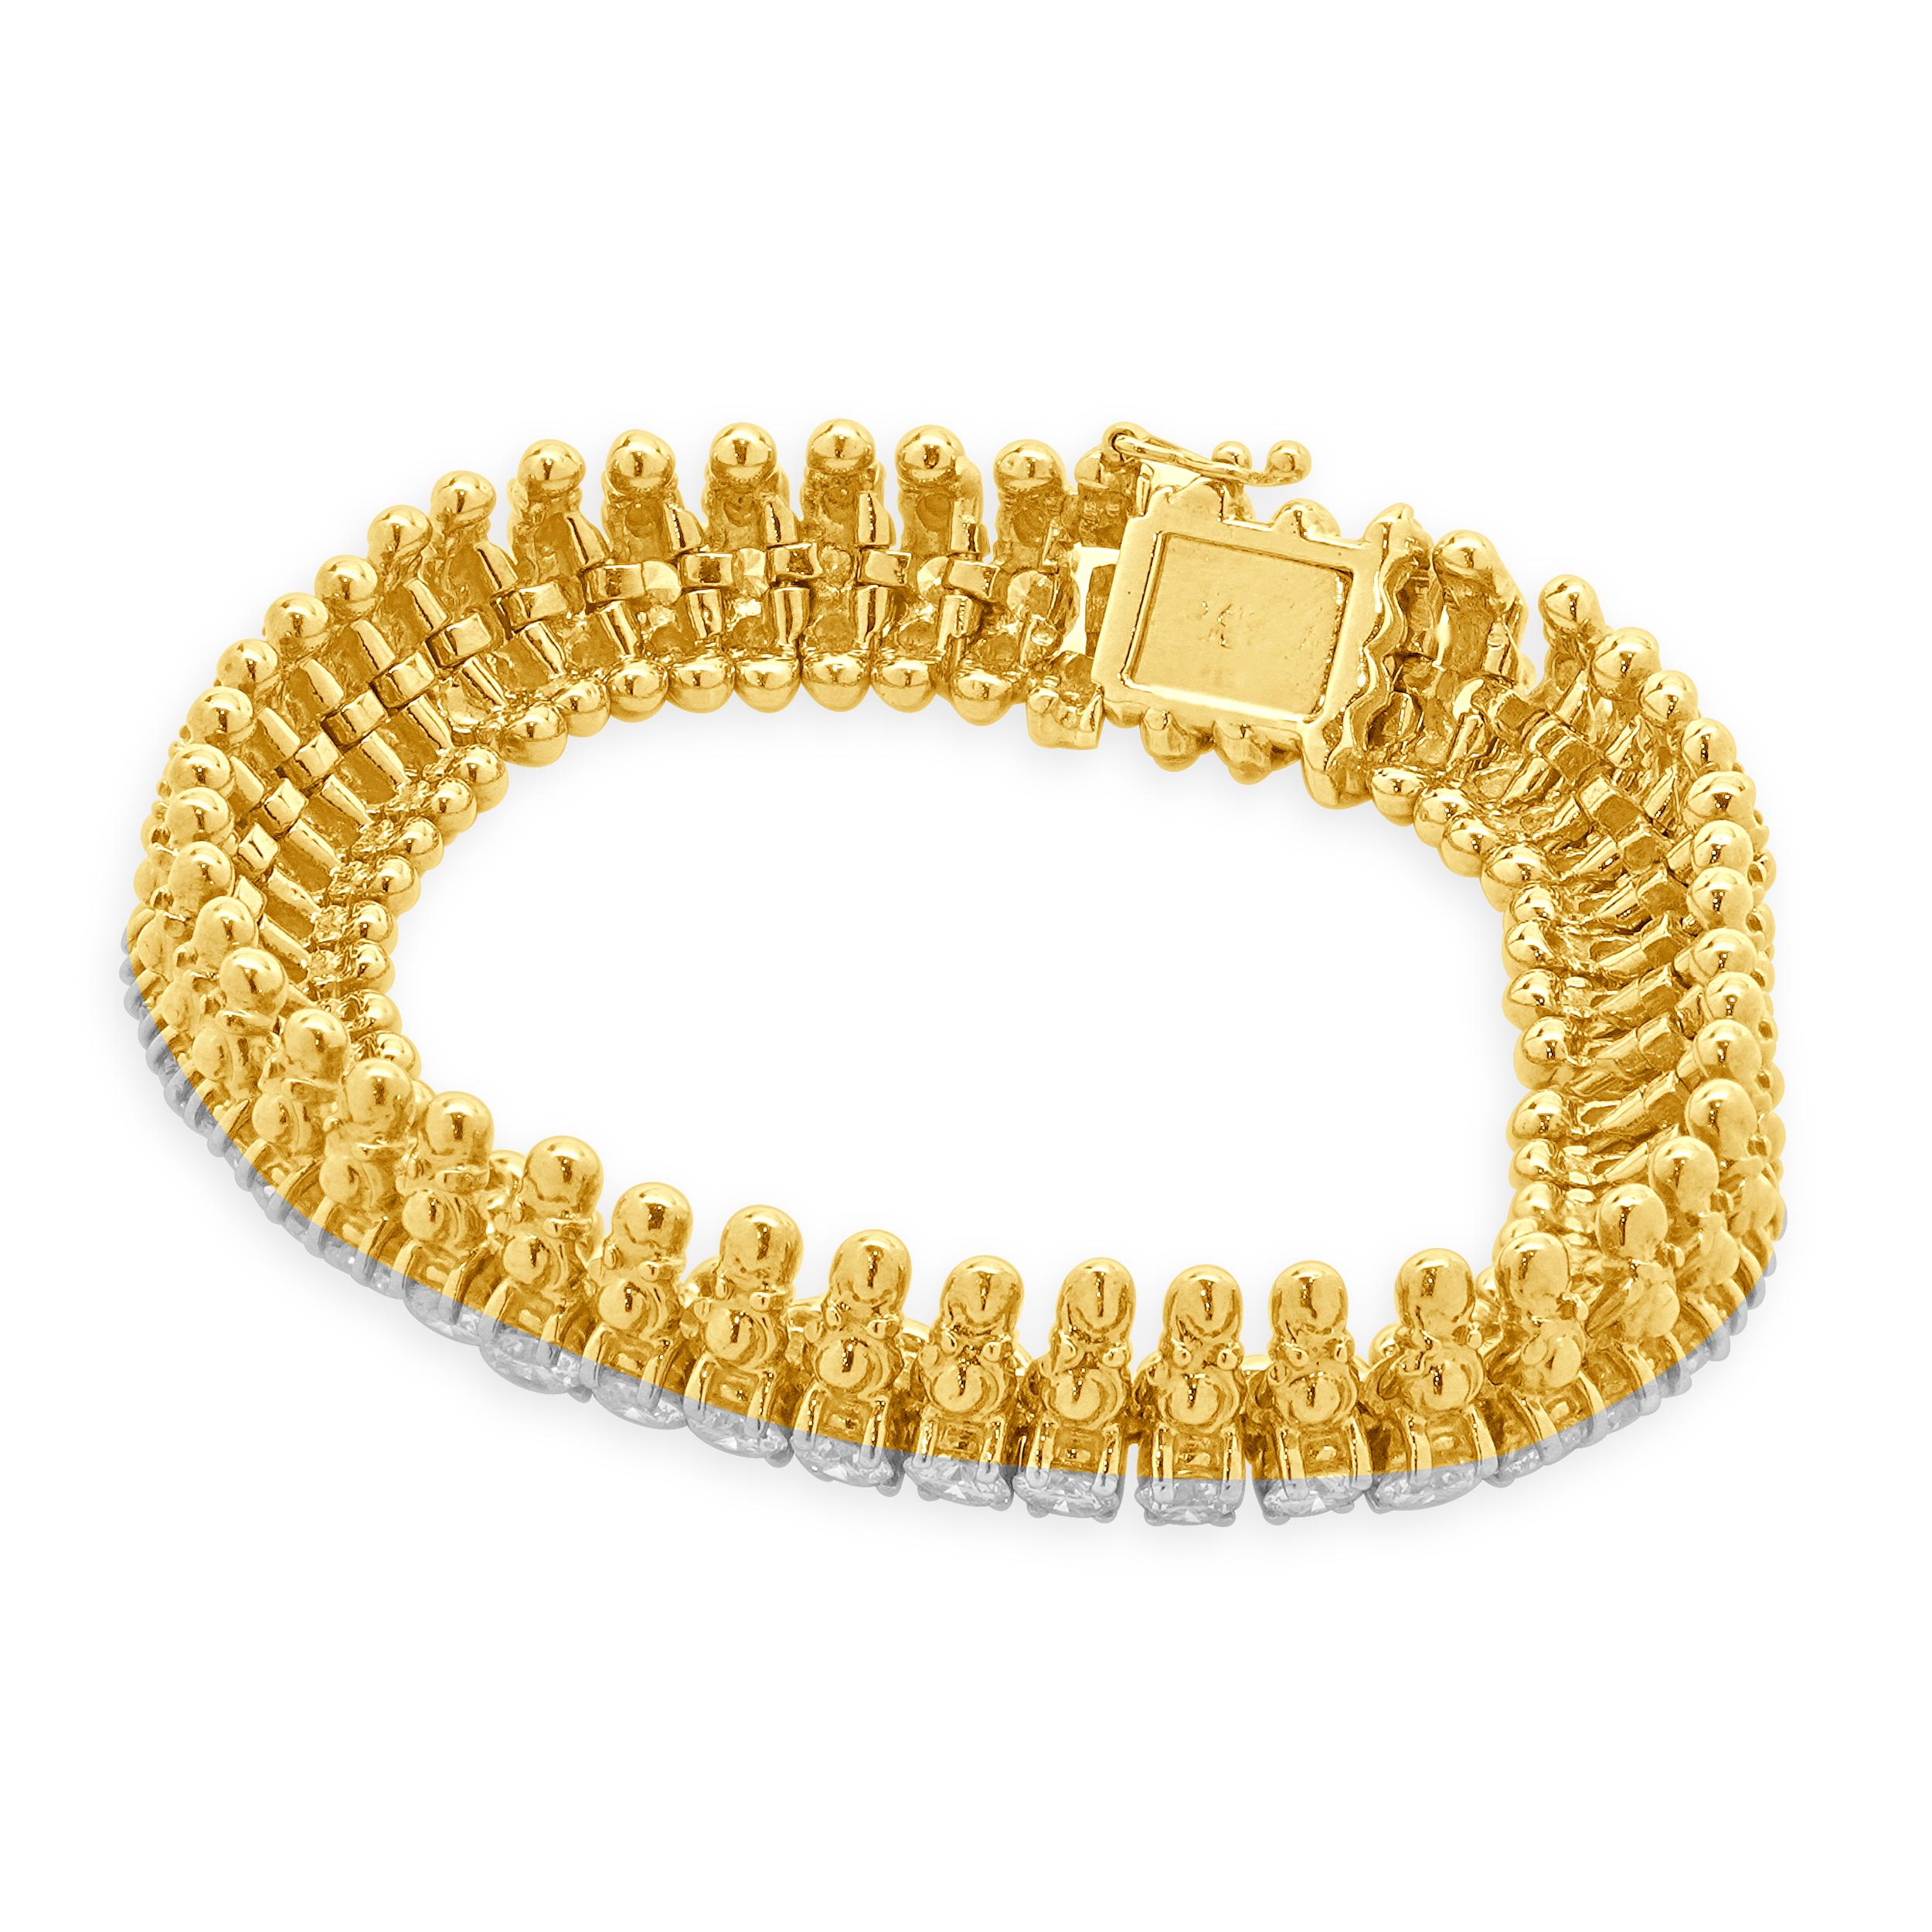 Designer: custom design
Material: 18K yellow Gold
Diamond: 48 round brilliant cut= 8.64cttw
Color: G
Clarity: SI1
Dimensions: bracelet will fit up to a 7-inch wrist
Weight: 55.80 grams
